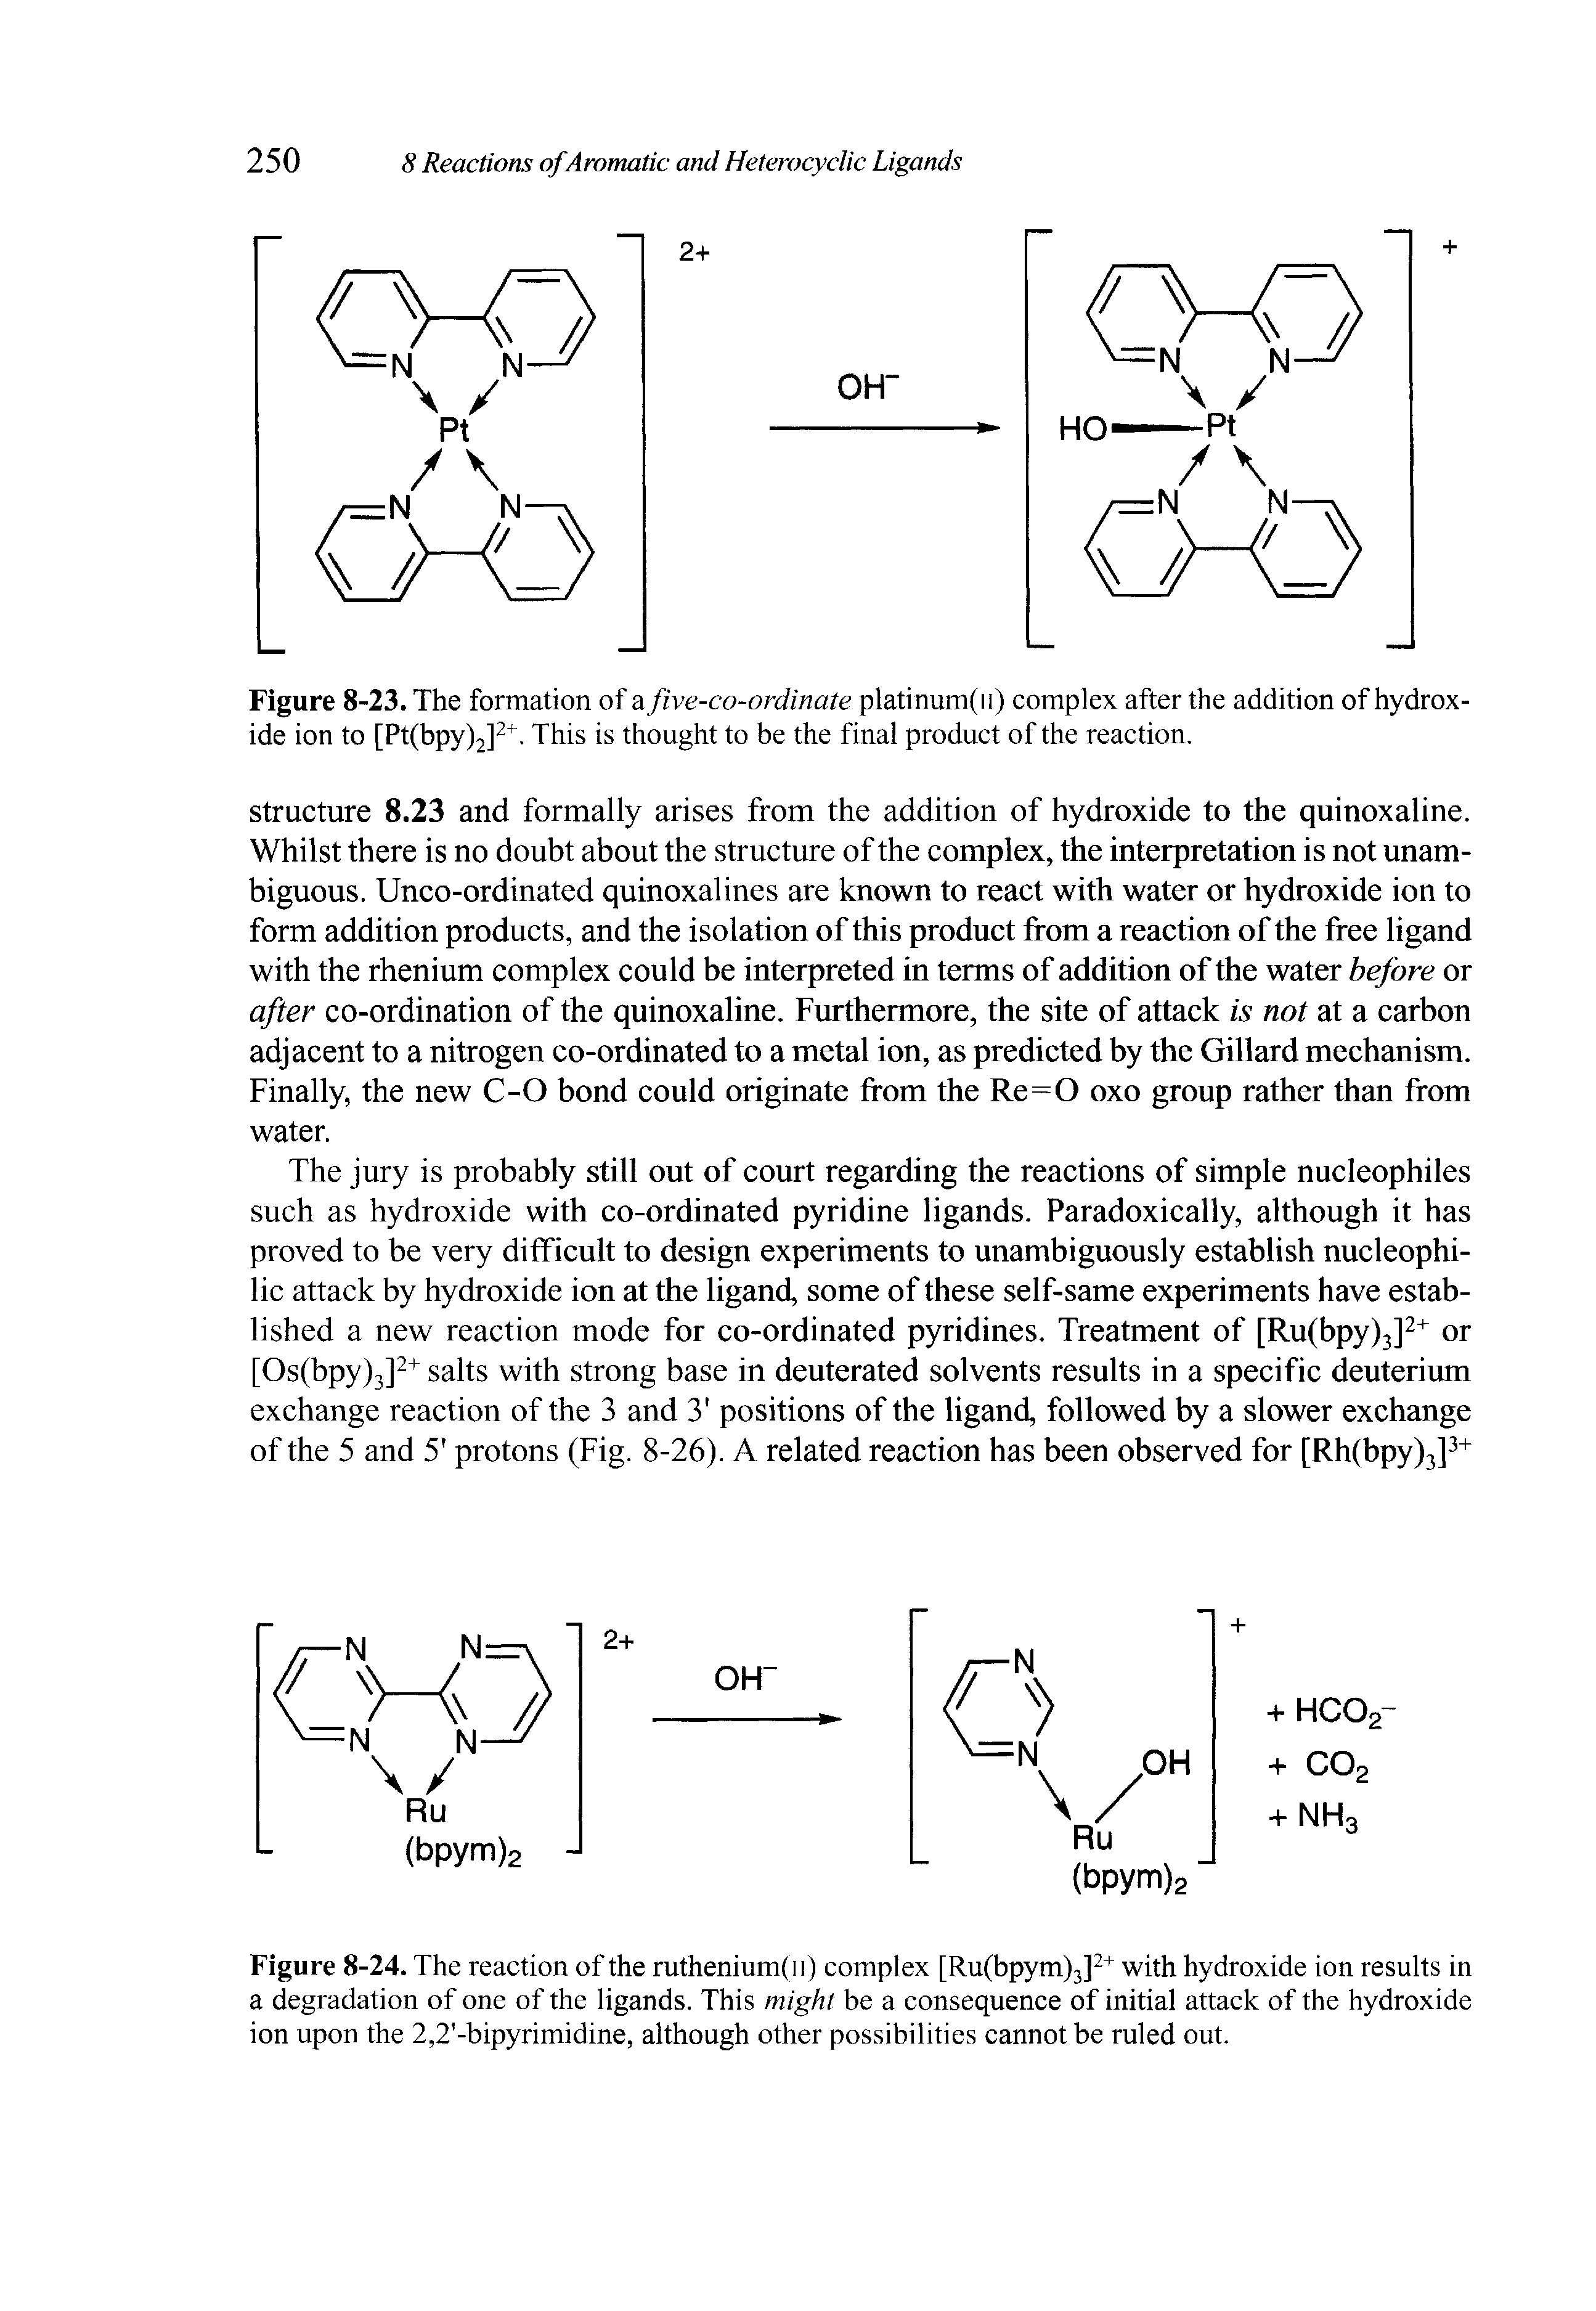 Figure 8-23. The formation of a five-co-ordinate platinum(n) complex after the addition of hydroxide ion to [Pt(bpy)2]2+. This is thought to be the final product of the reaction.